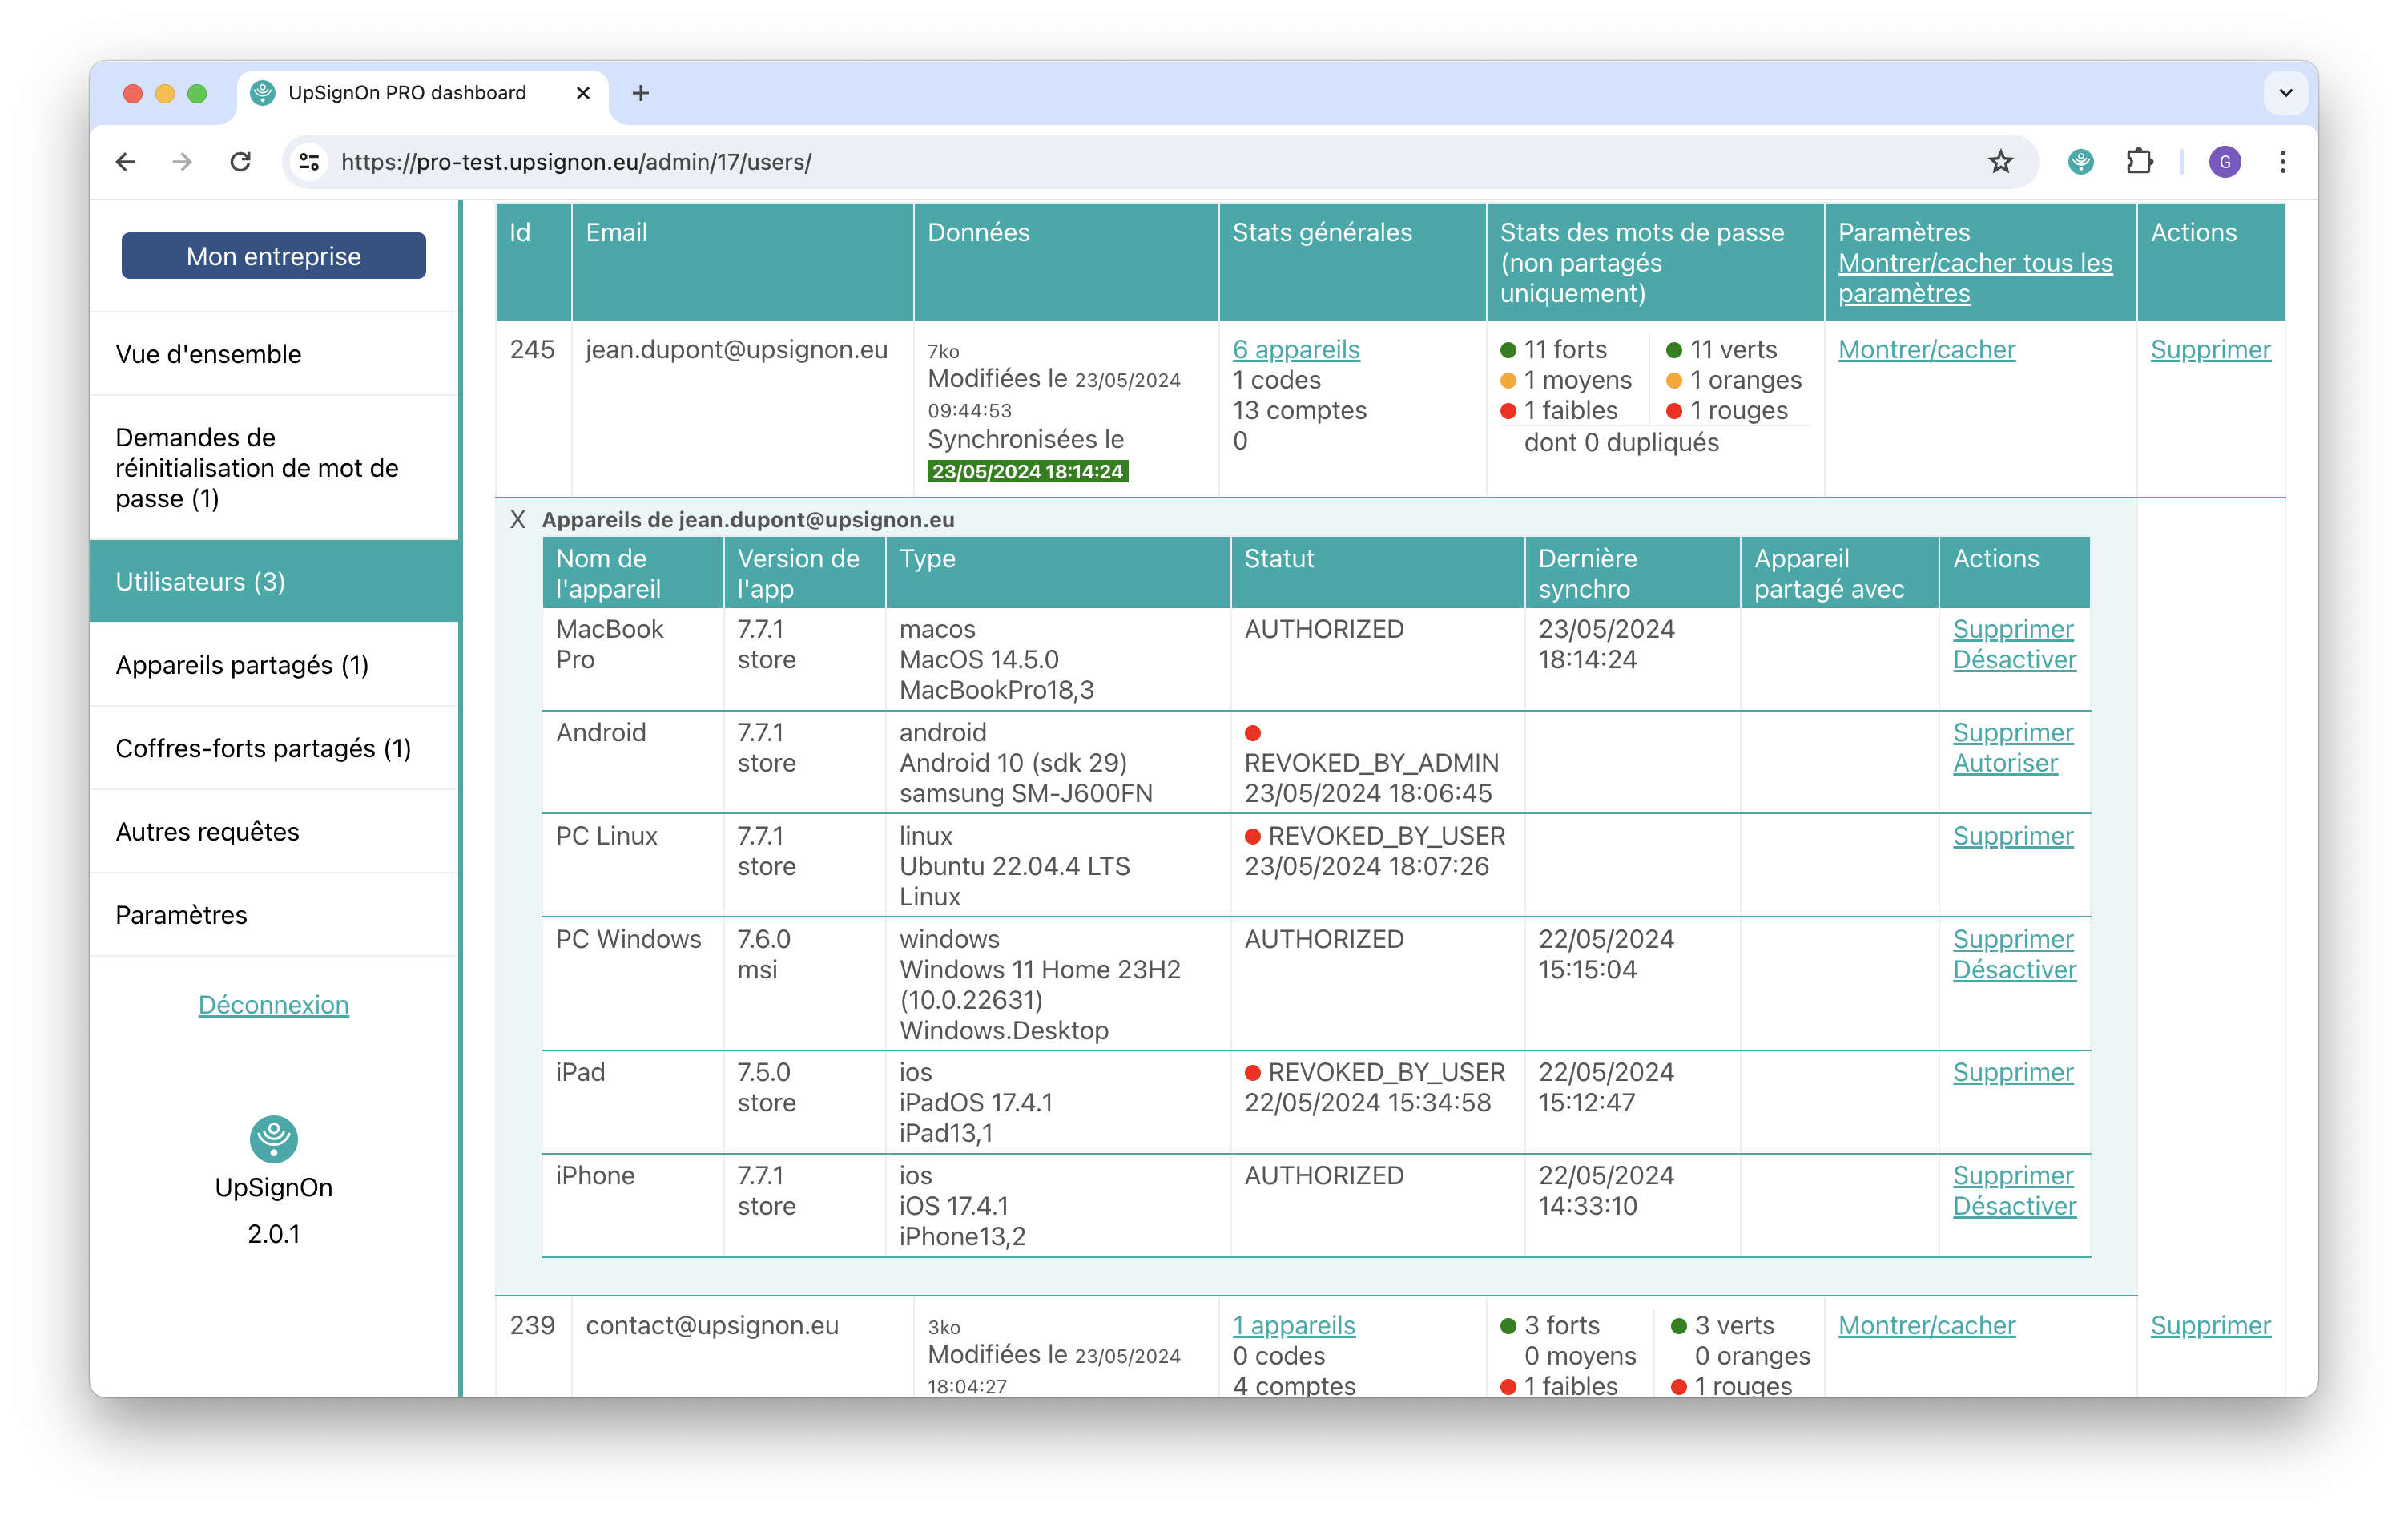 Screenshot of the “Users” page of the supervision console, with the view of devices open for a user.